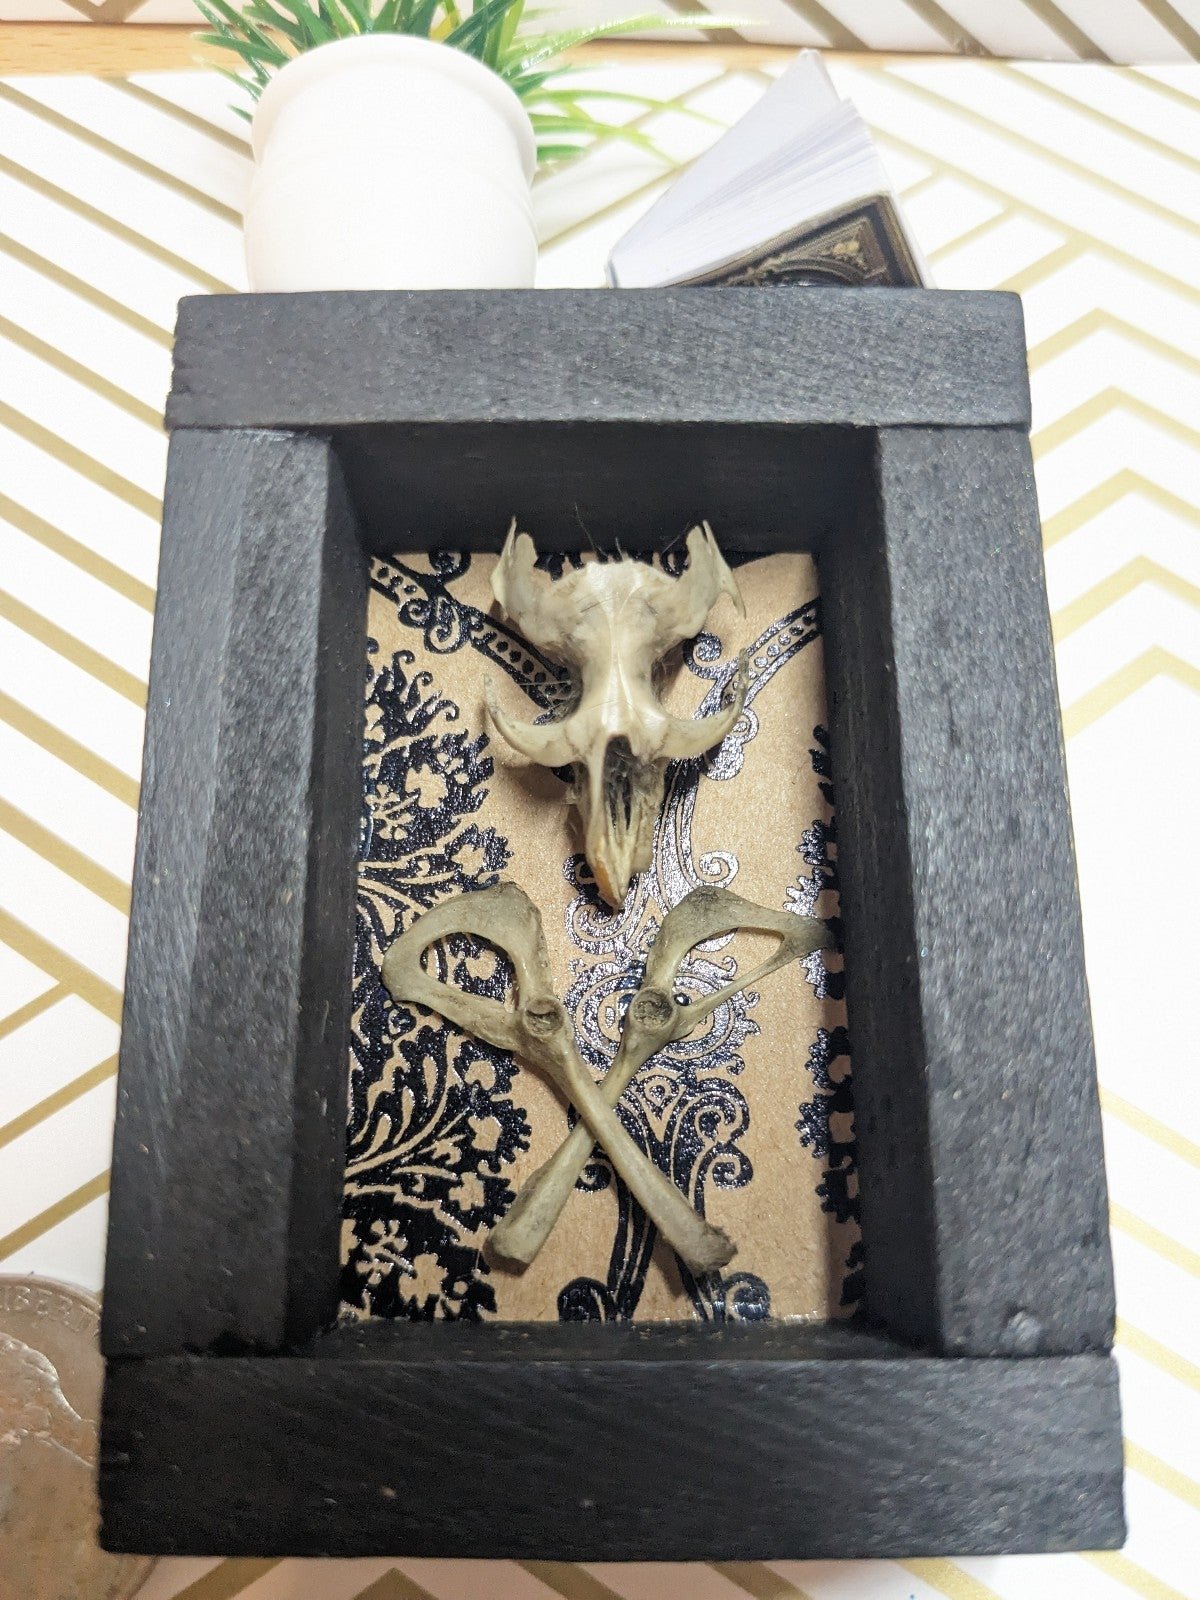 Handcrafted Framed oddities ooak ethically sourced mouse bones eBlbzL9Vt